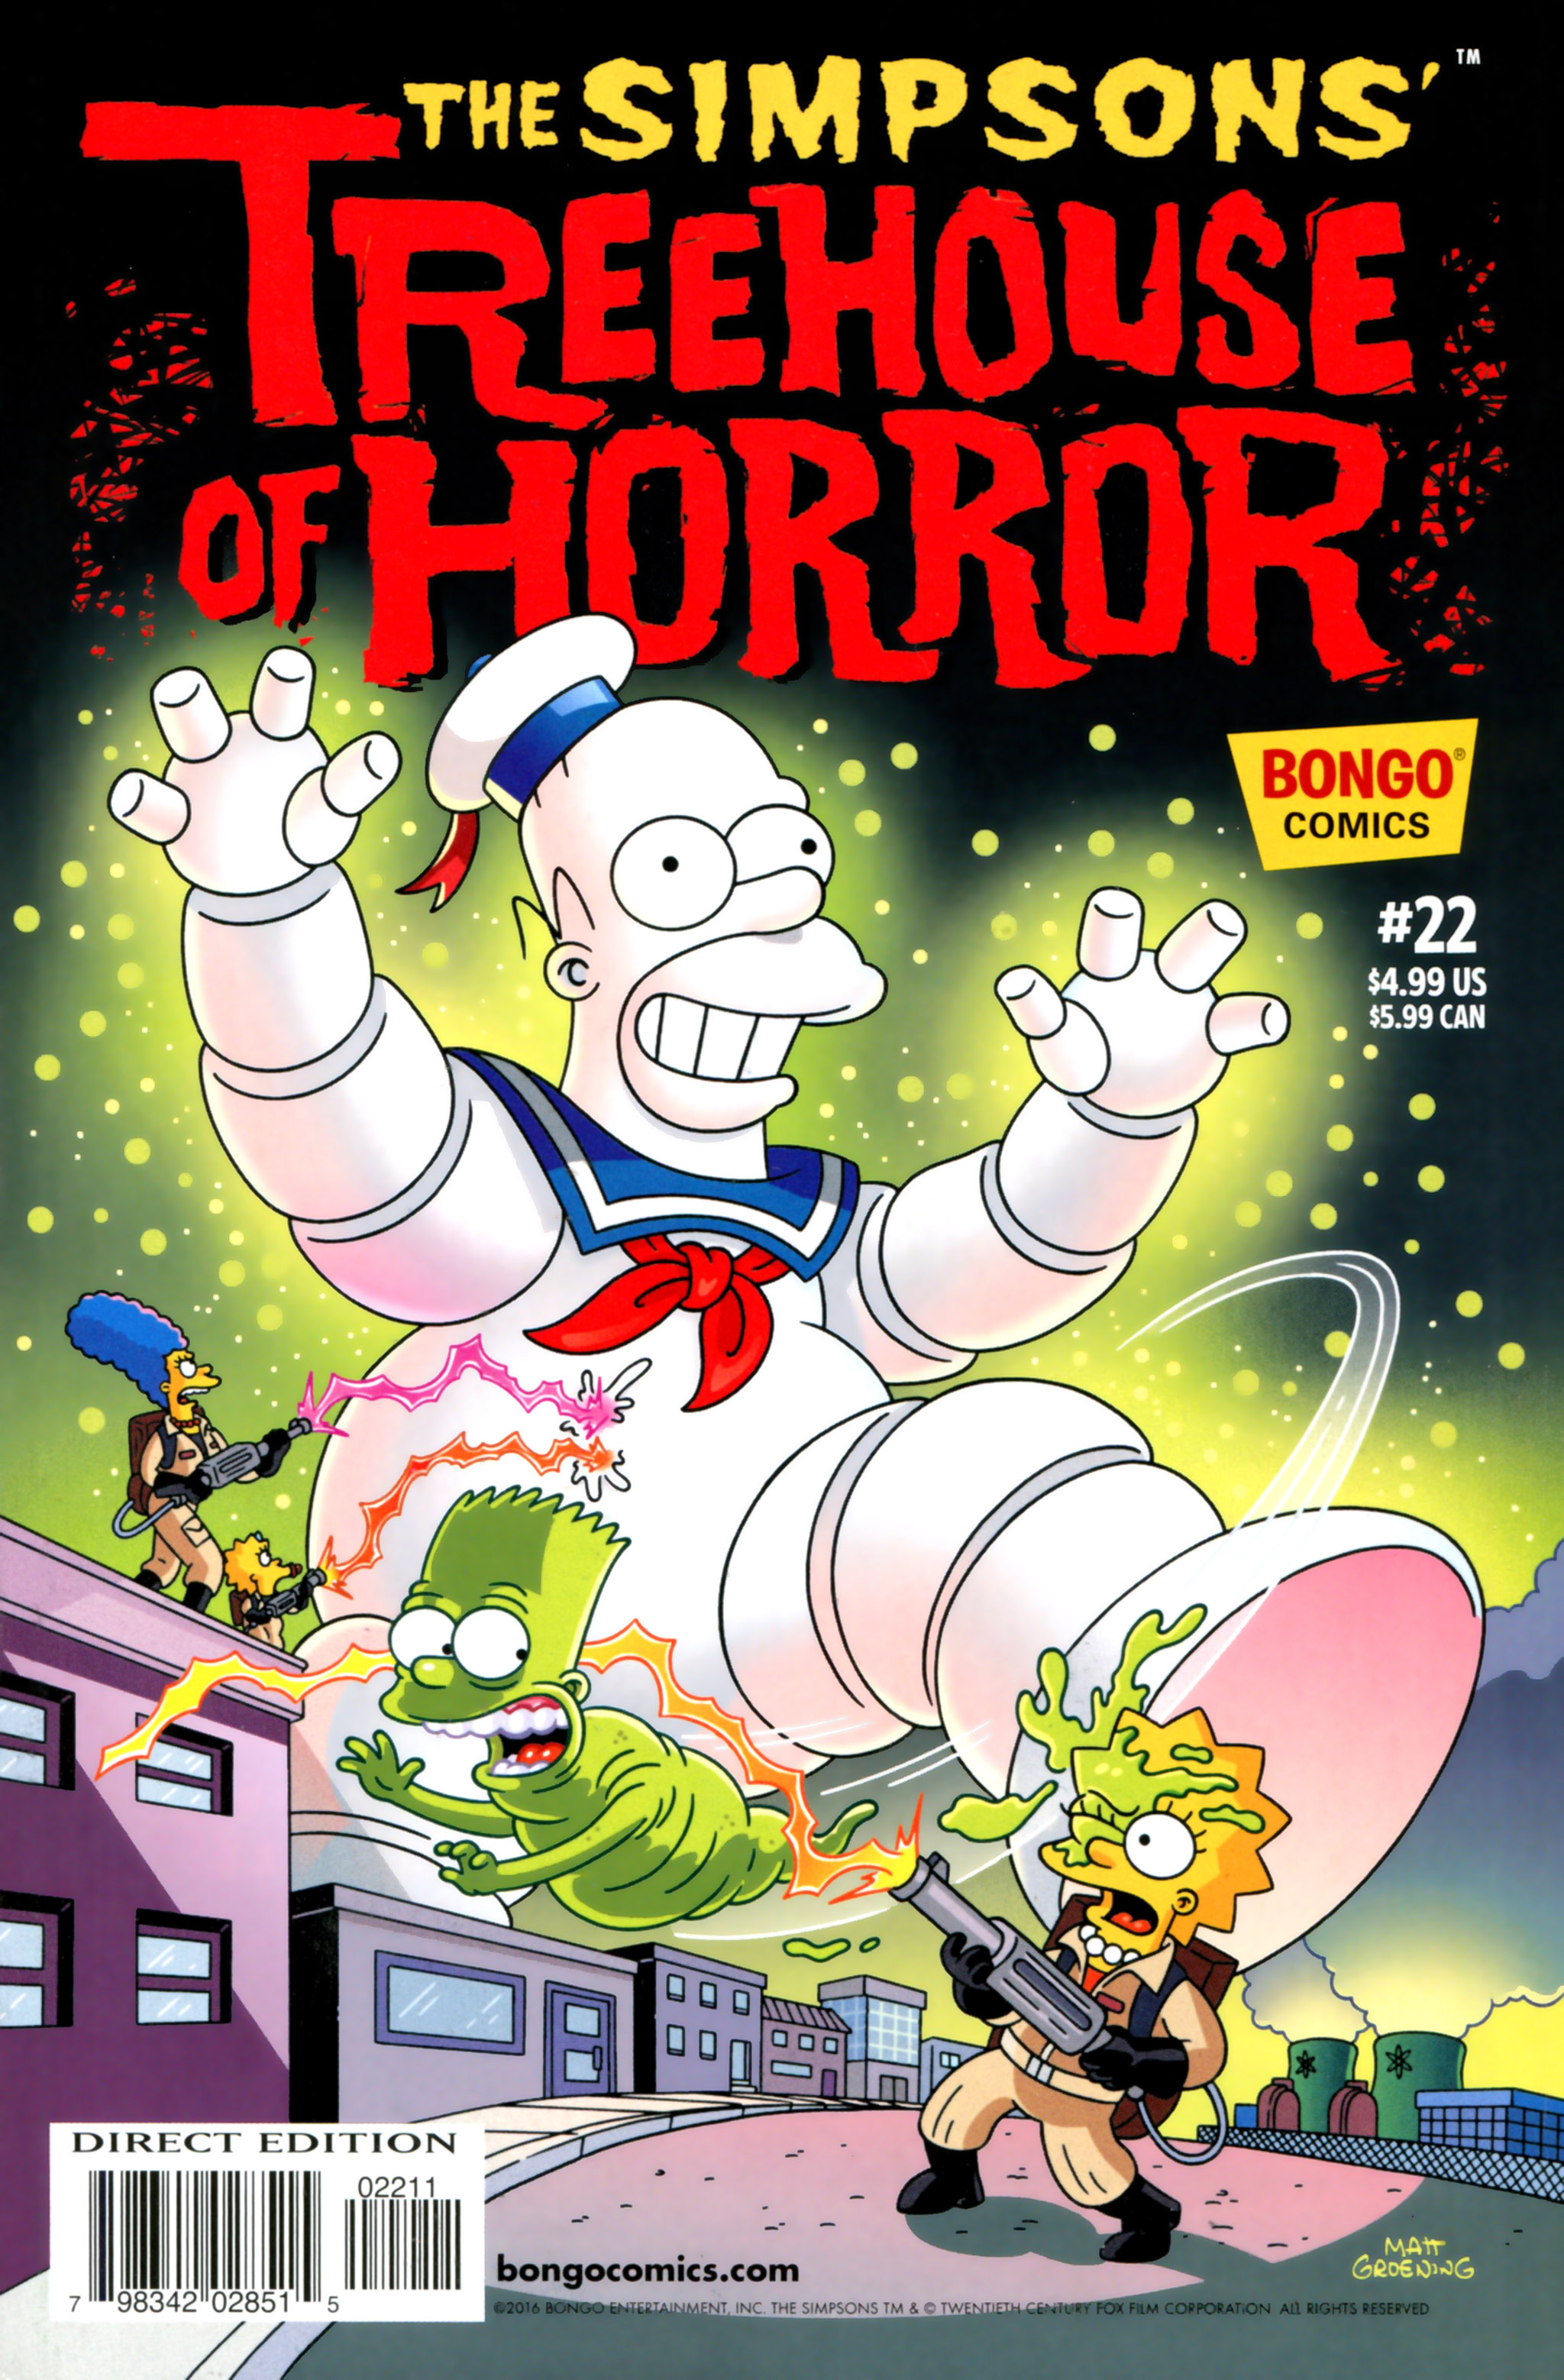 Read online Treehouse of Horror comic -  Issue #22 - 1